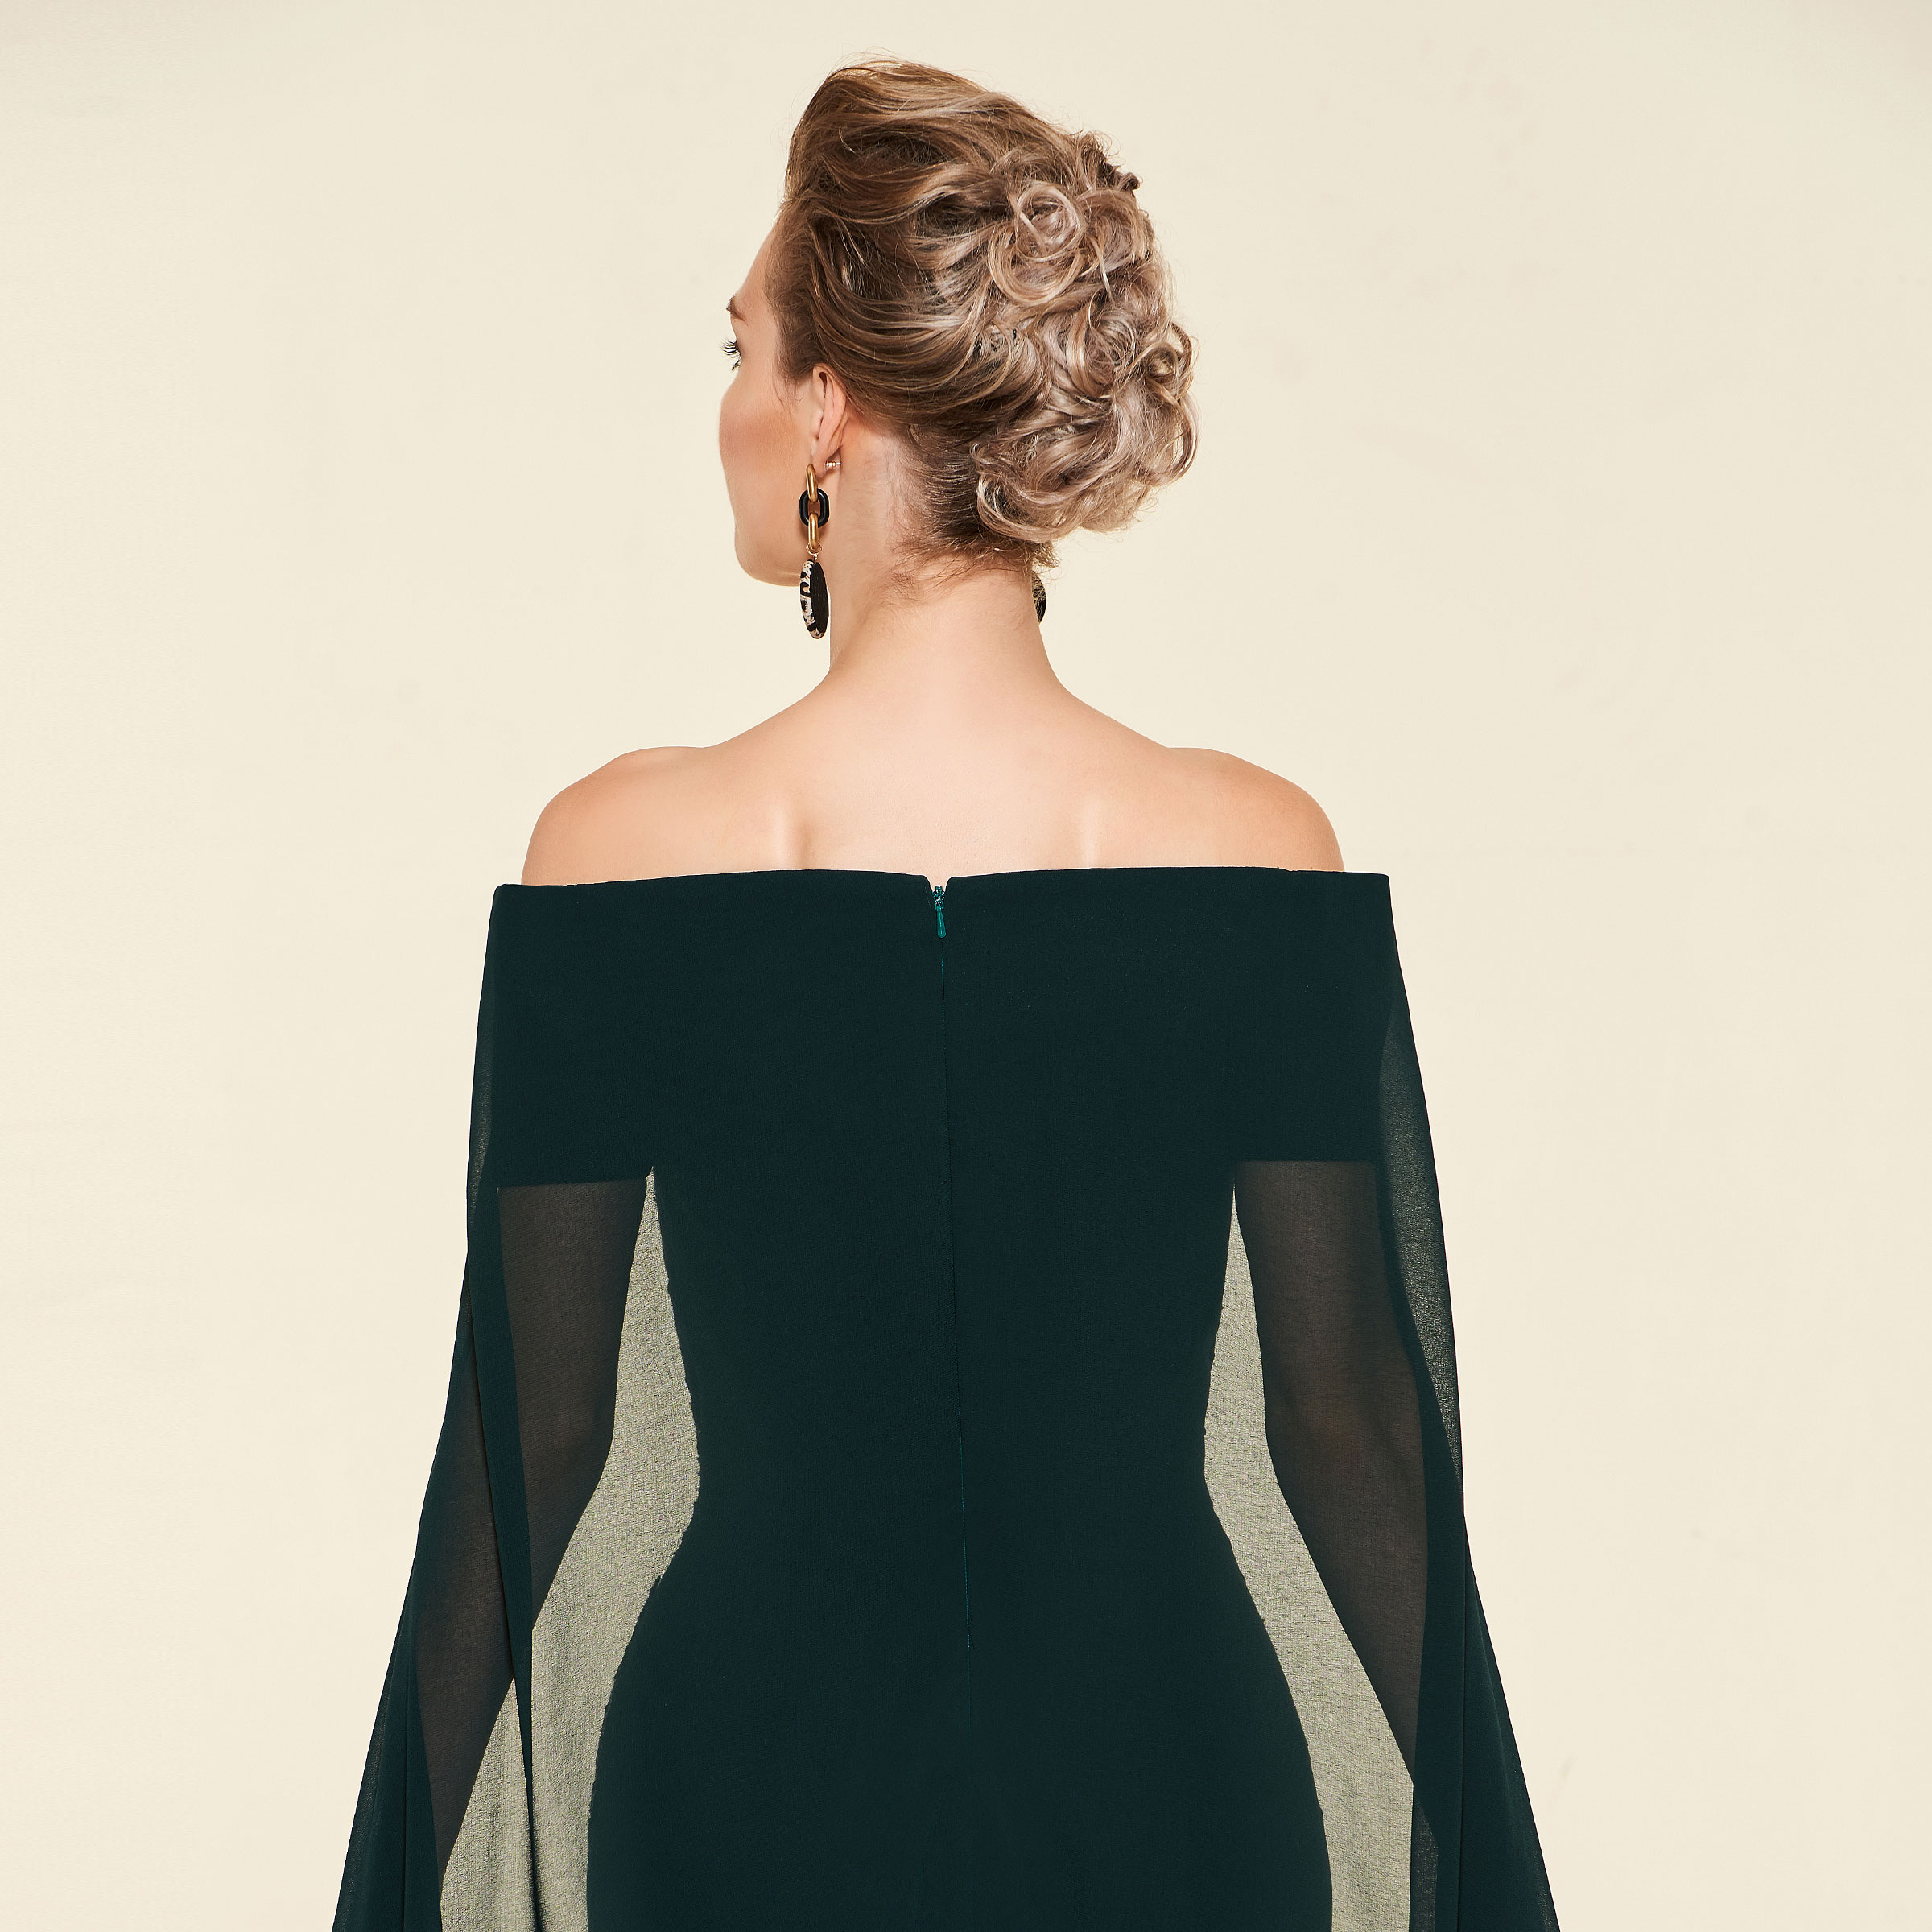 Ericdress Off-The-Shoulder Mermaid Mother of the Bride Dress